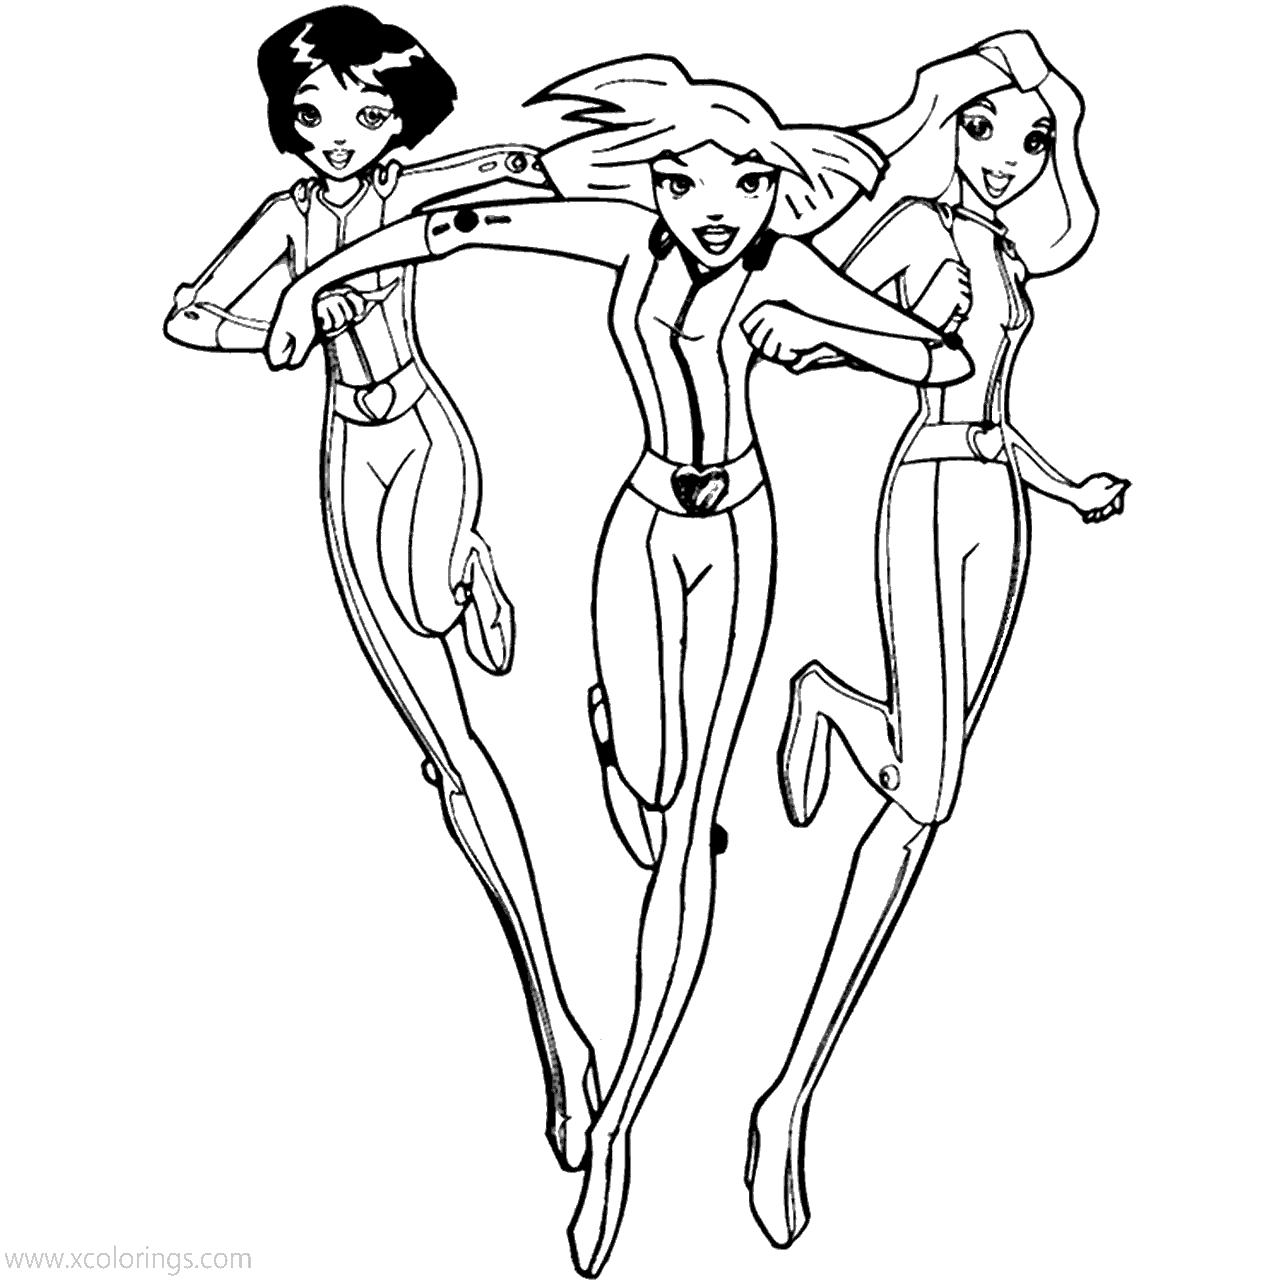 Free Totally Spies Coloring Pages Girls are Running printable